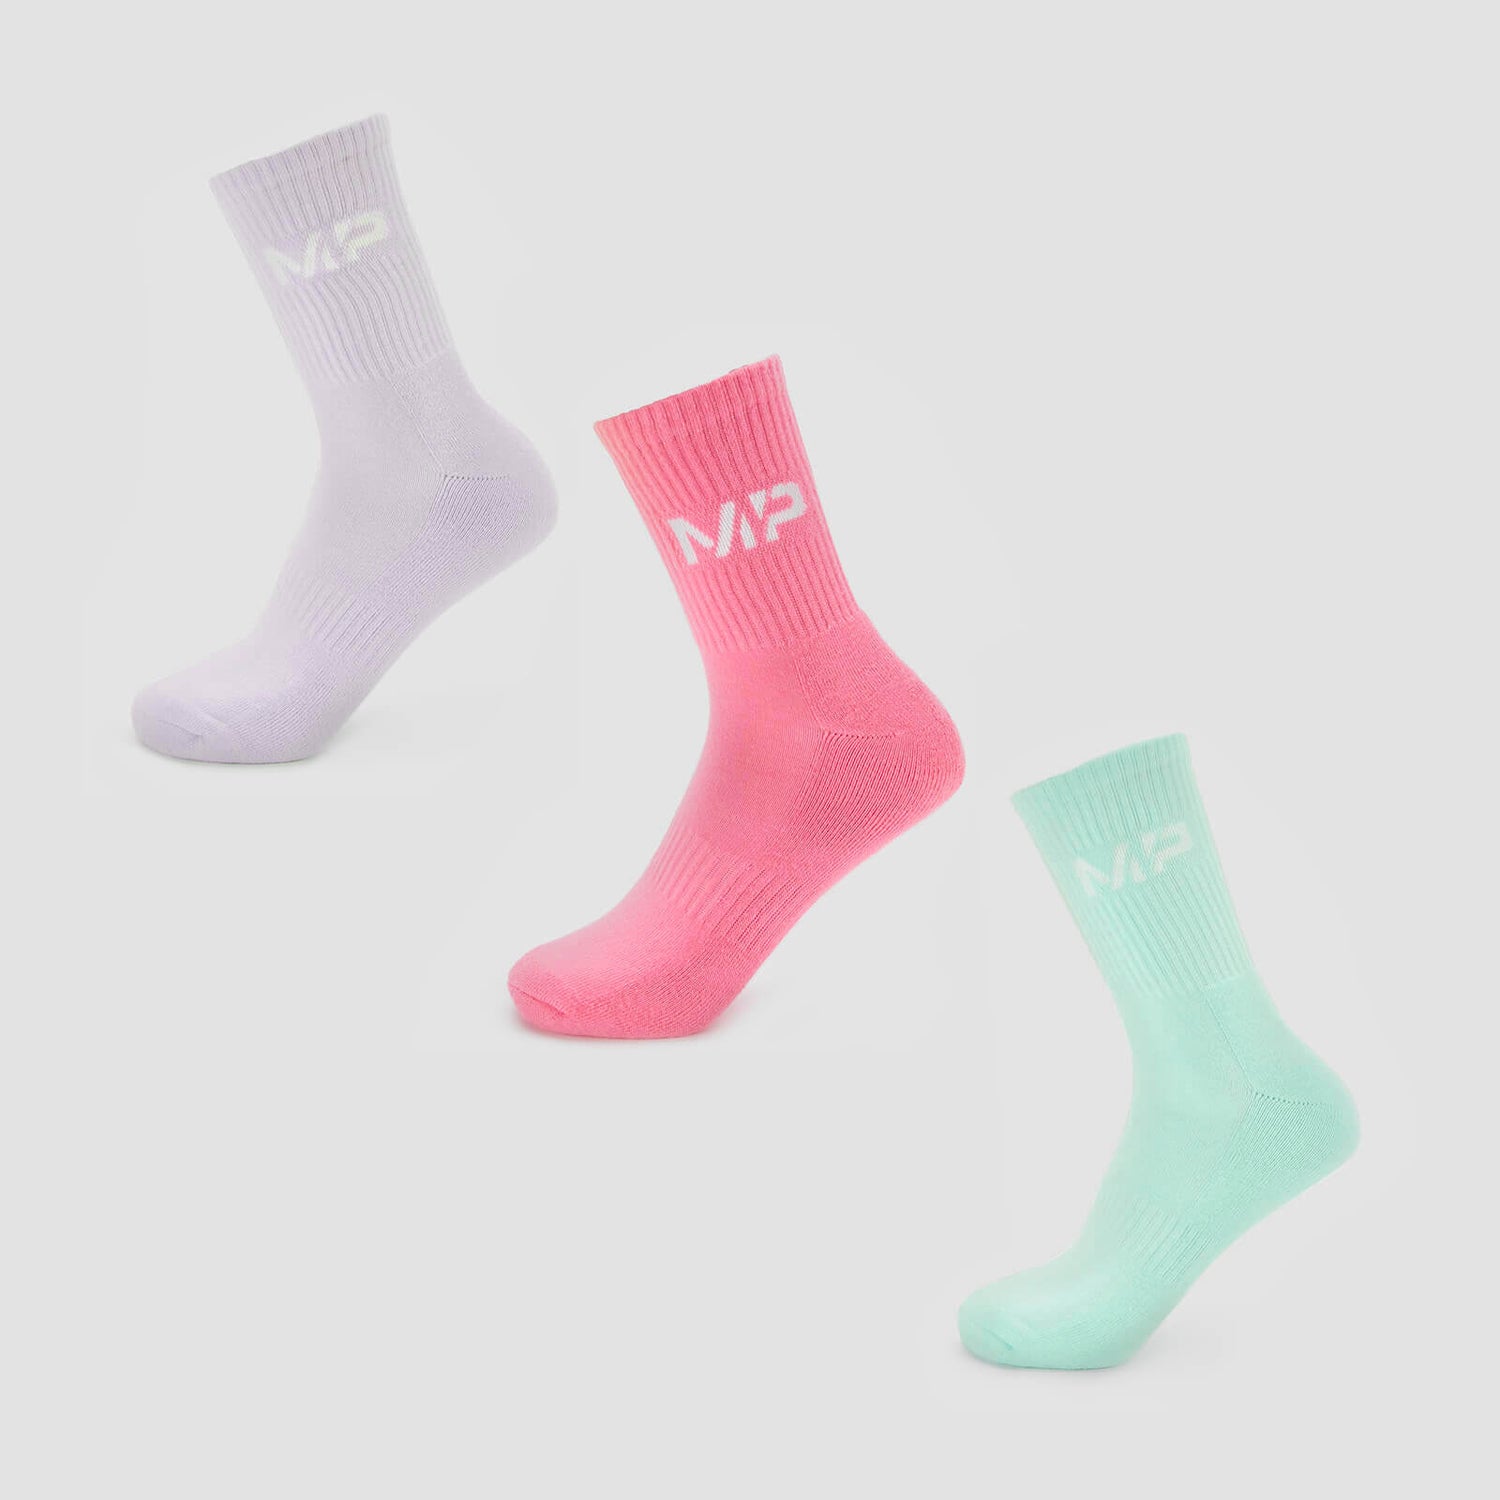 MP Women's Neon Brights Crew Socks (3 Pack) - Candy Floss/Neomint/Lilac - UK 3-6